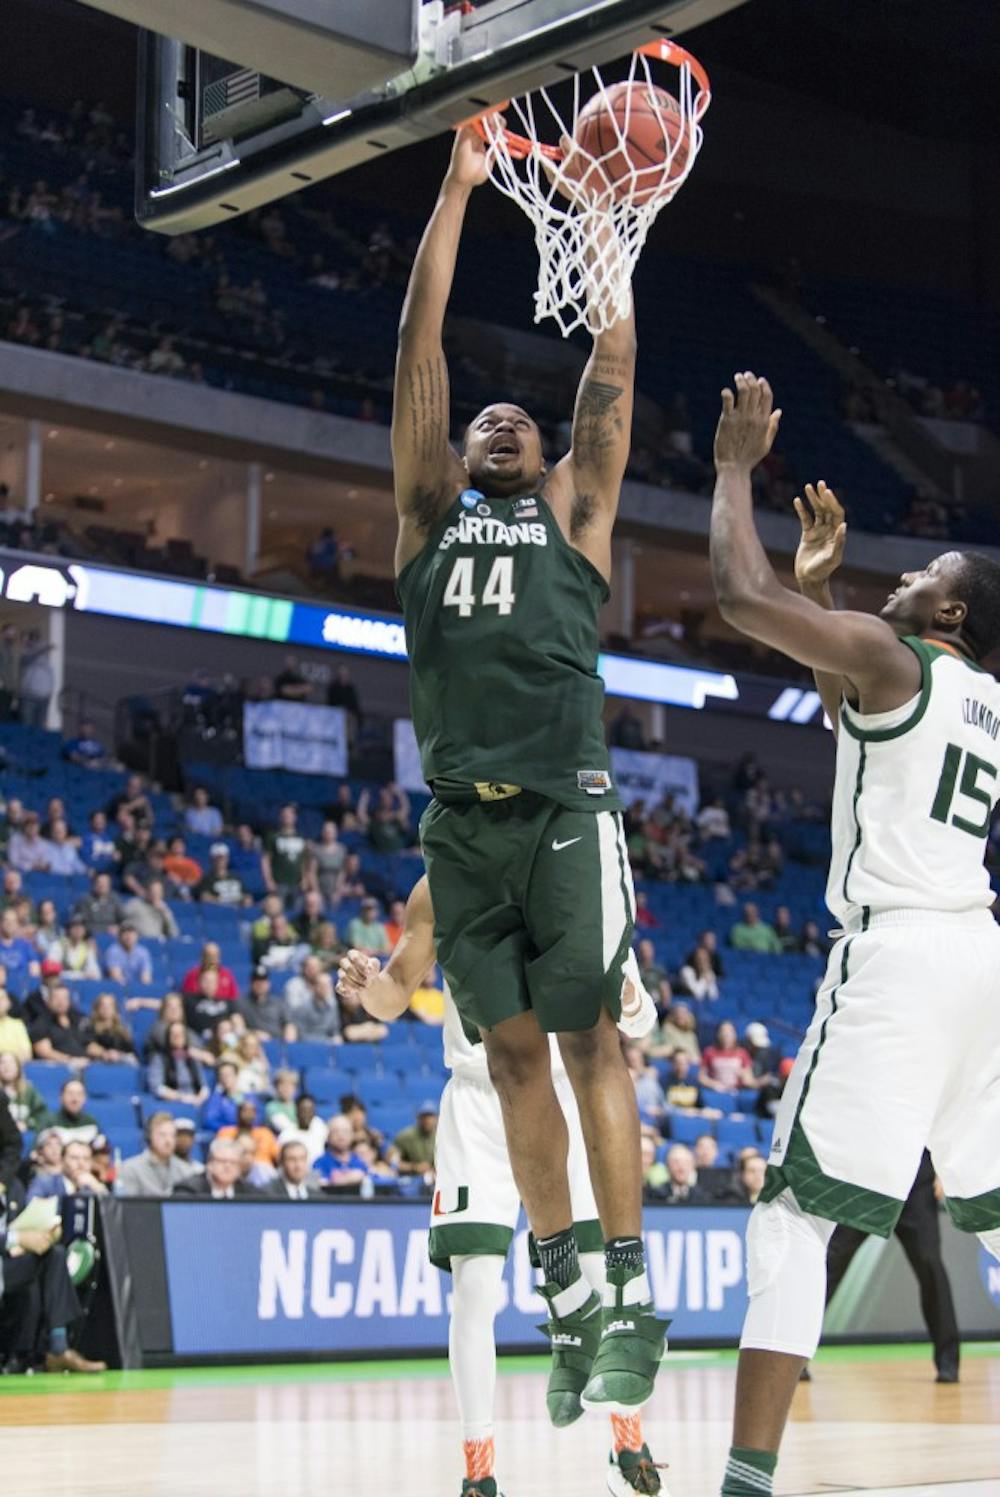 Freshman forward Nick Ward (44) dunks the ball during the second half of the game against University of Miami (Fla.) in the first round of the Men's NCAA Tournament on March 17, 2017 at  at the BOK Center in Tulsa, Okla.The Spartans defeated  the Hurricanes, 78-58.